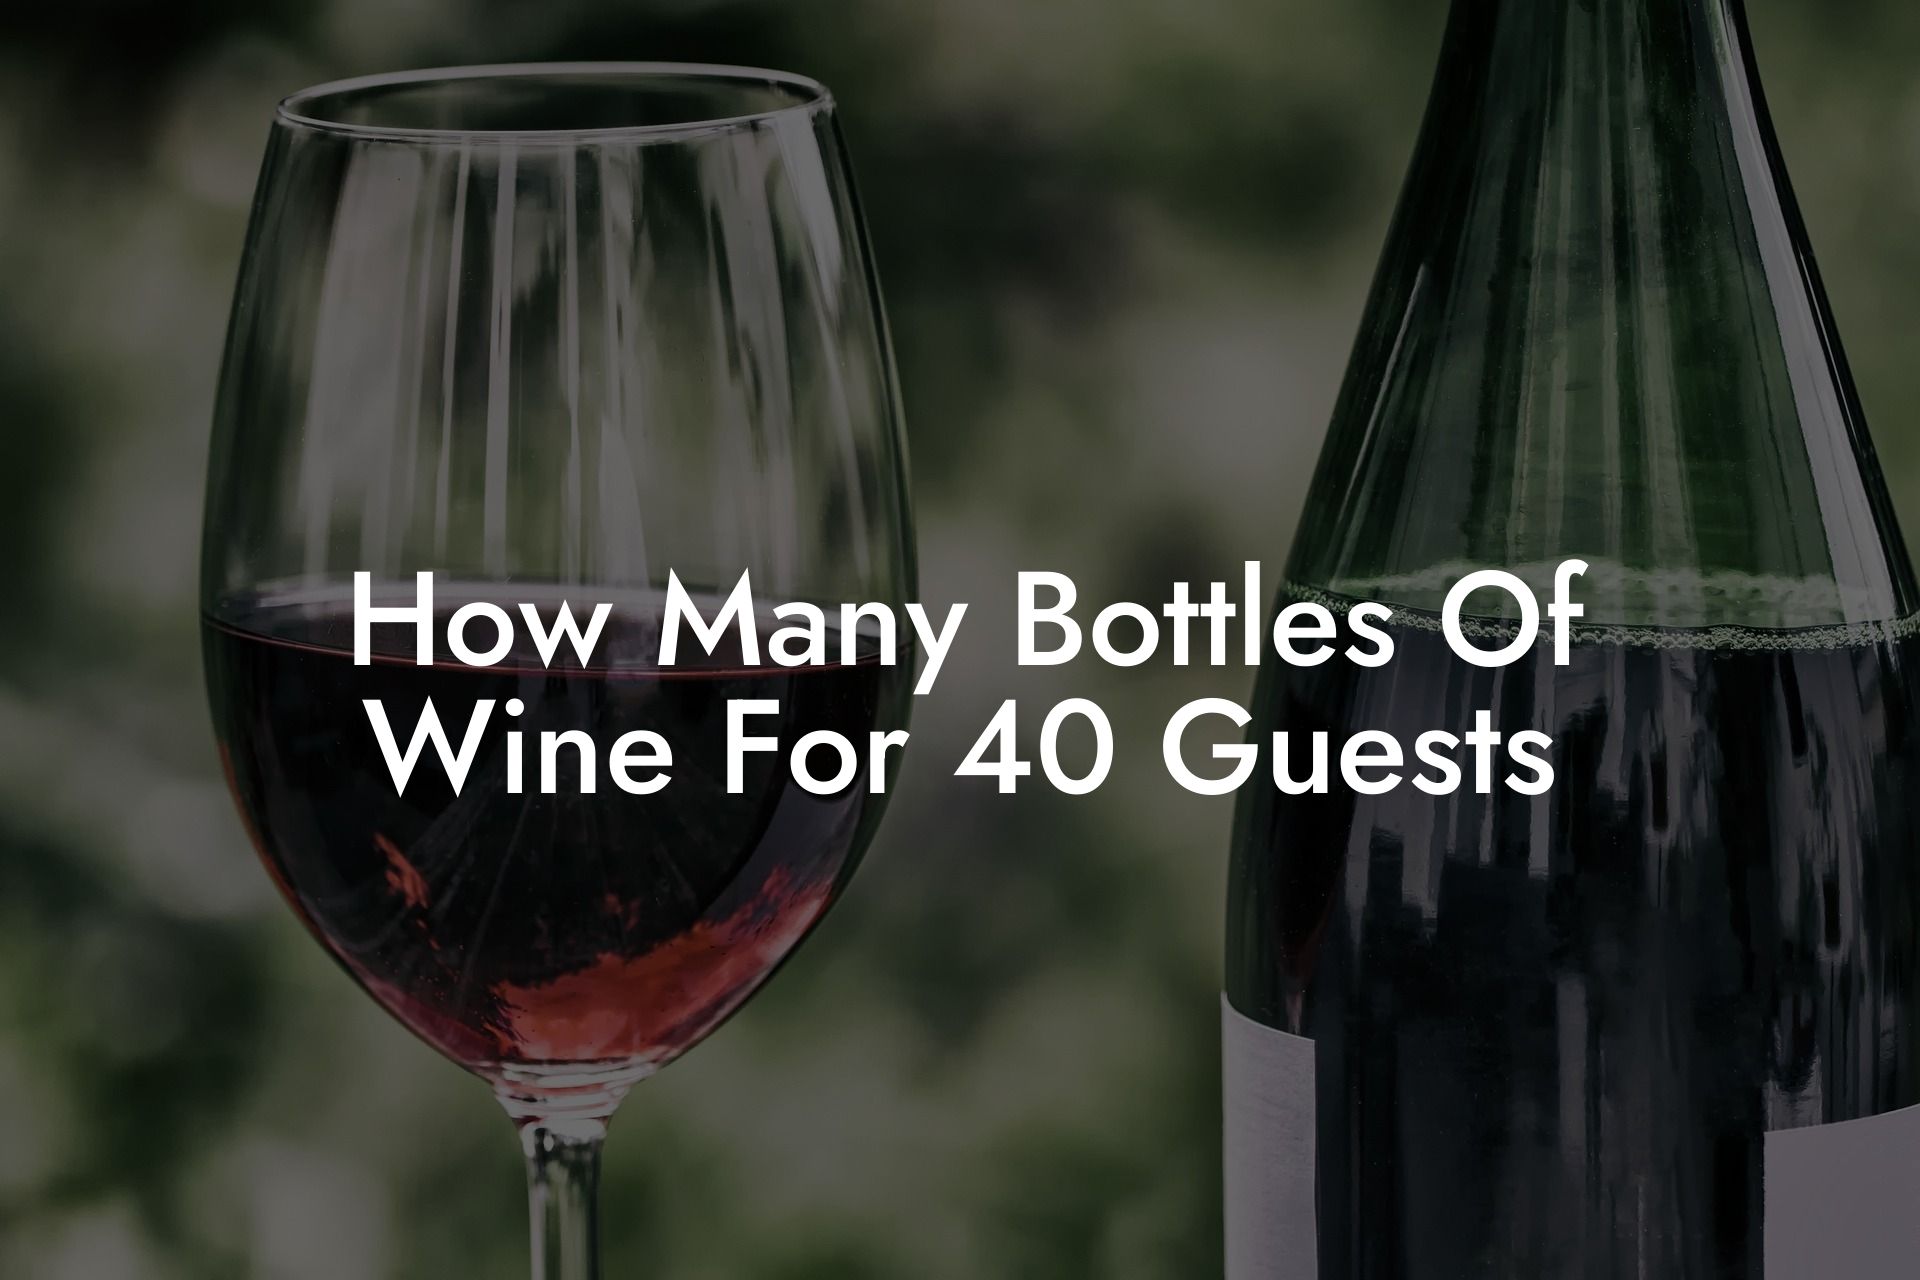 How Many Bottles Of Wine For 40 Guests